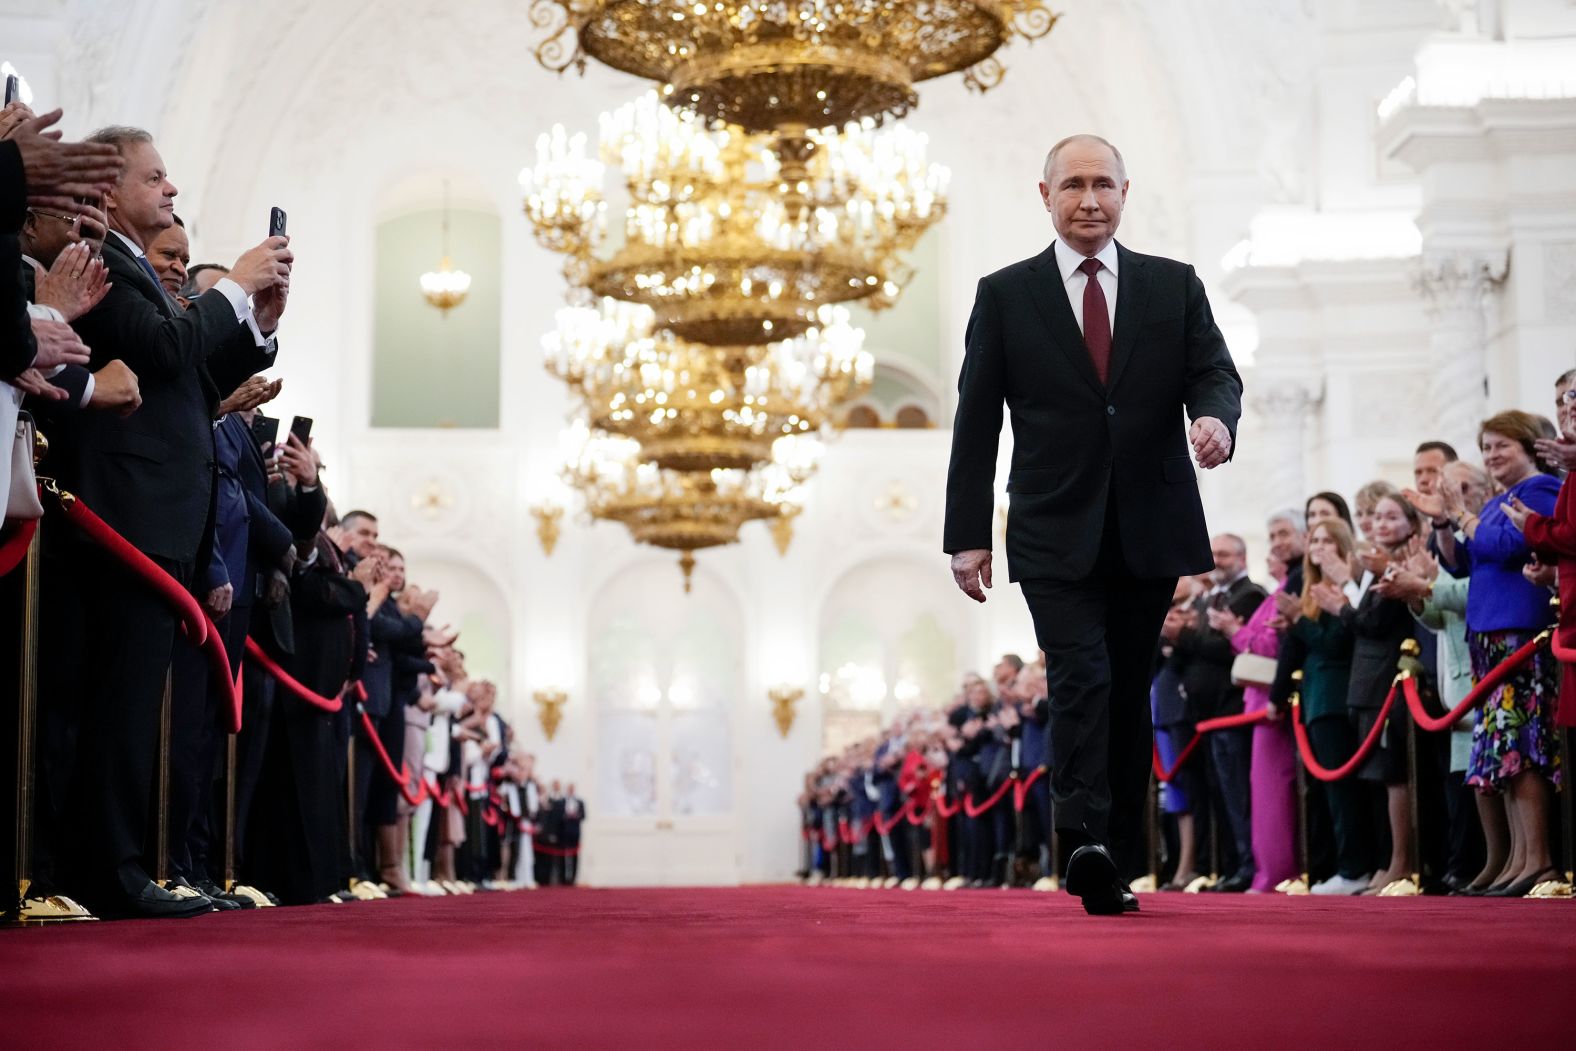 Vladimir Putin walks to take his oath as Russian president during an inauguration ceremony in Moscow on Tuesday, May 7. Putin won <a href="index.php?page=&url=https%3A%2F%2Fwww.cnn.com%2F2024%2F05%2F07%2Feurope%2Fputin-inauguration-russia-president-fifth-term-intl" target="_blank">Russia's stage-managed election</a> by an overwhelming majority in March, securing for himself another six-year term that could see him rule until at least his 77th birthday.